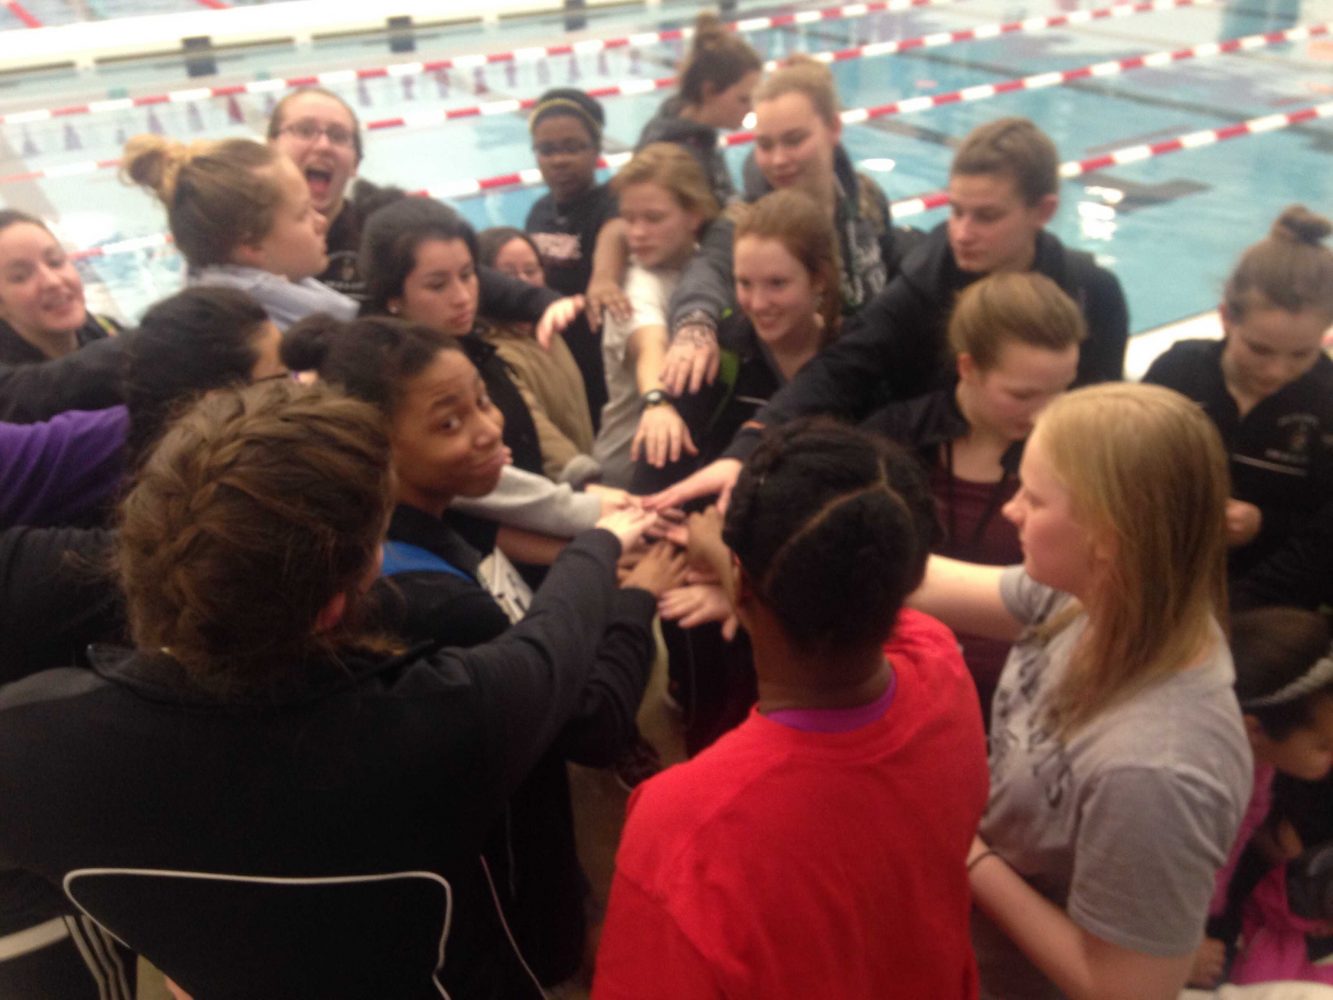 The team rallied together before leaving the meet to do their team chant one last time. 